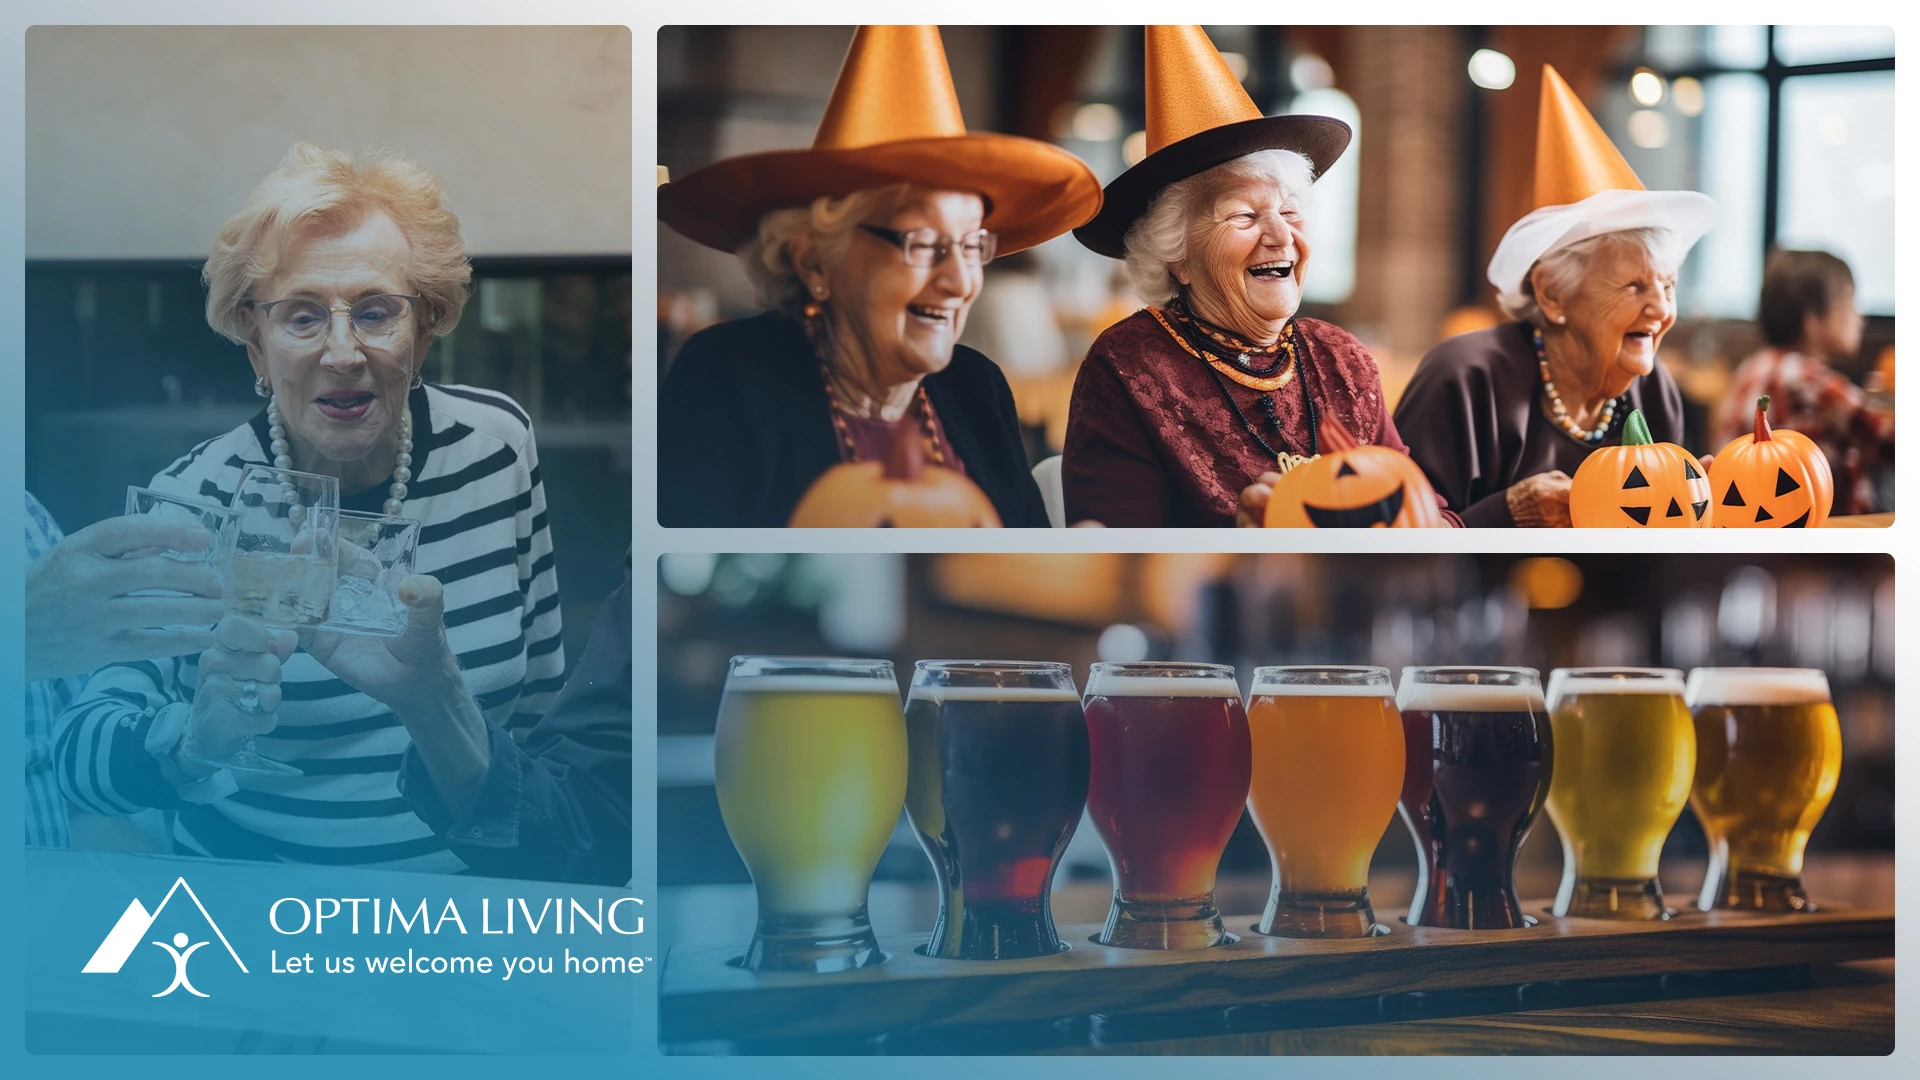 October themed images of senior women dressed as witches and a beer flight